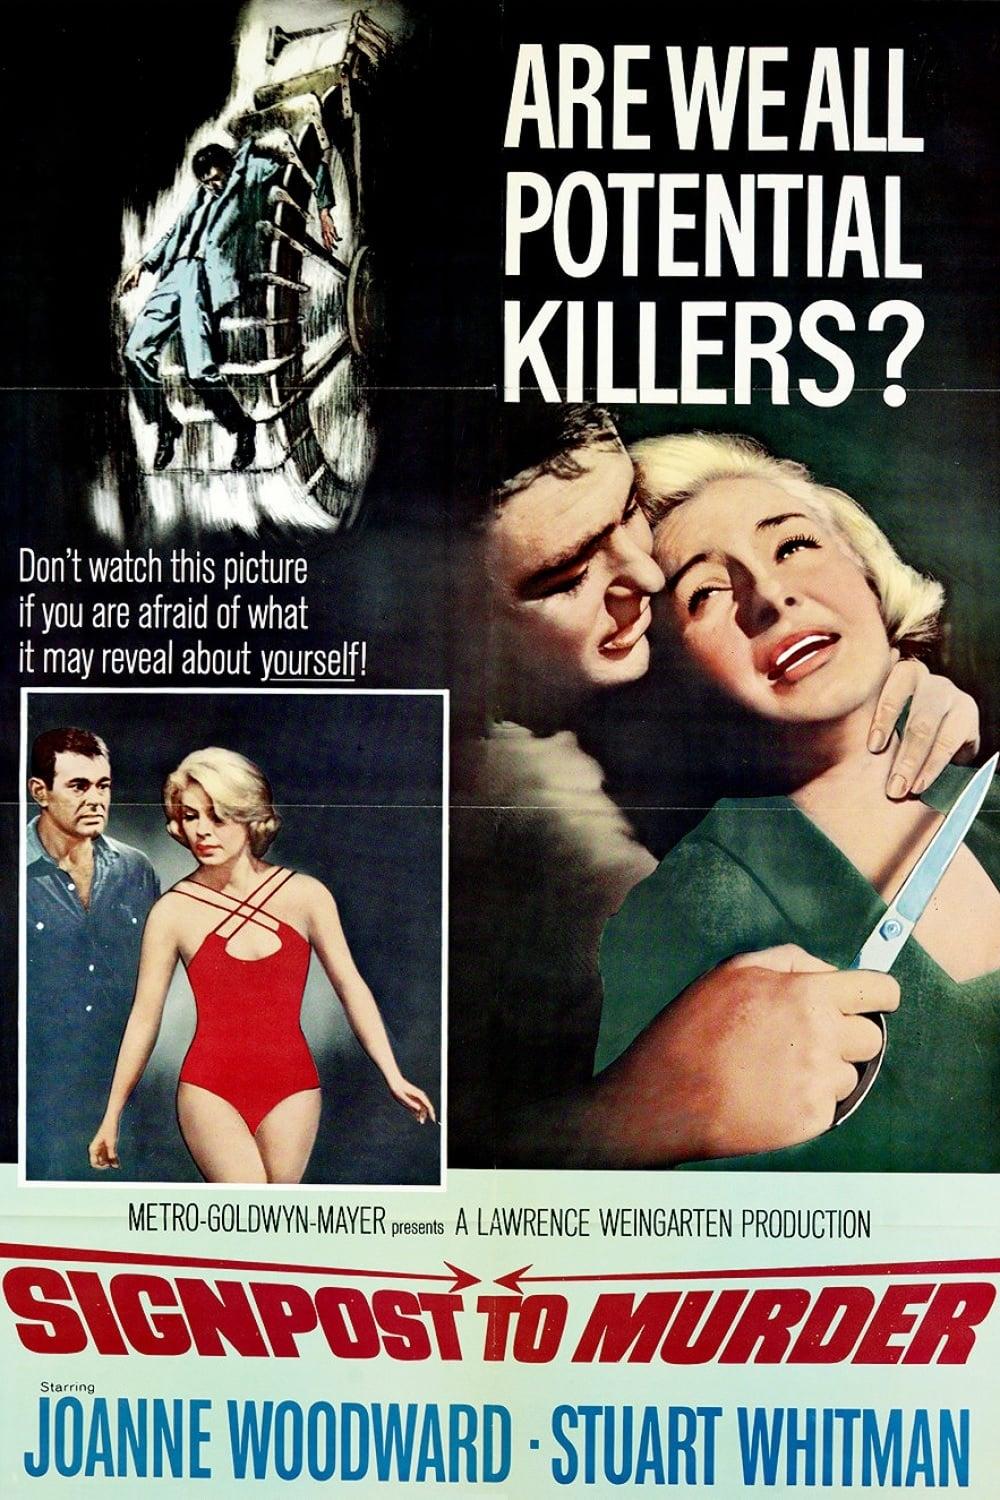 Signpost to Murder poster